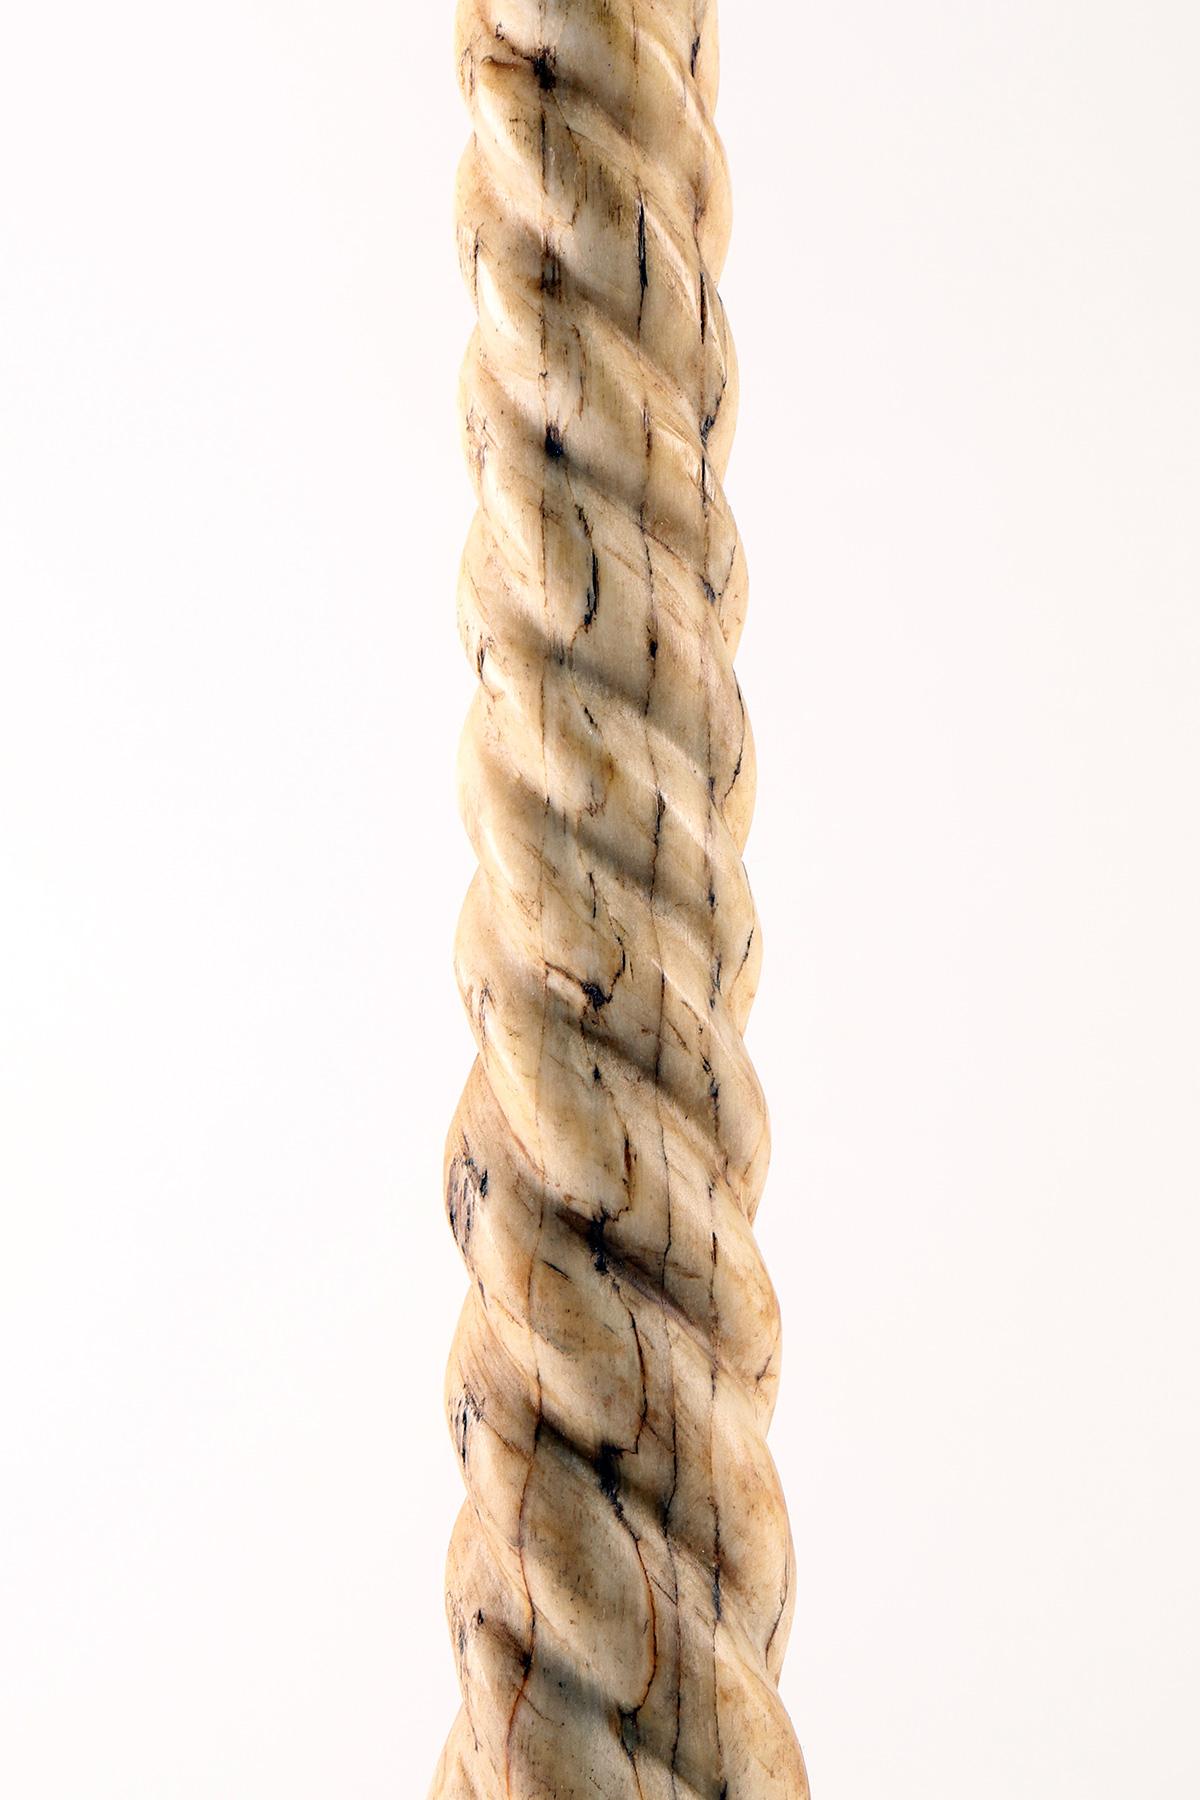 19th Century Marlin Fish Rostrum Turned to Emulate the Narwal Tusk, Italy 1850